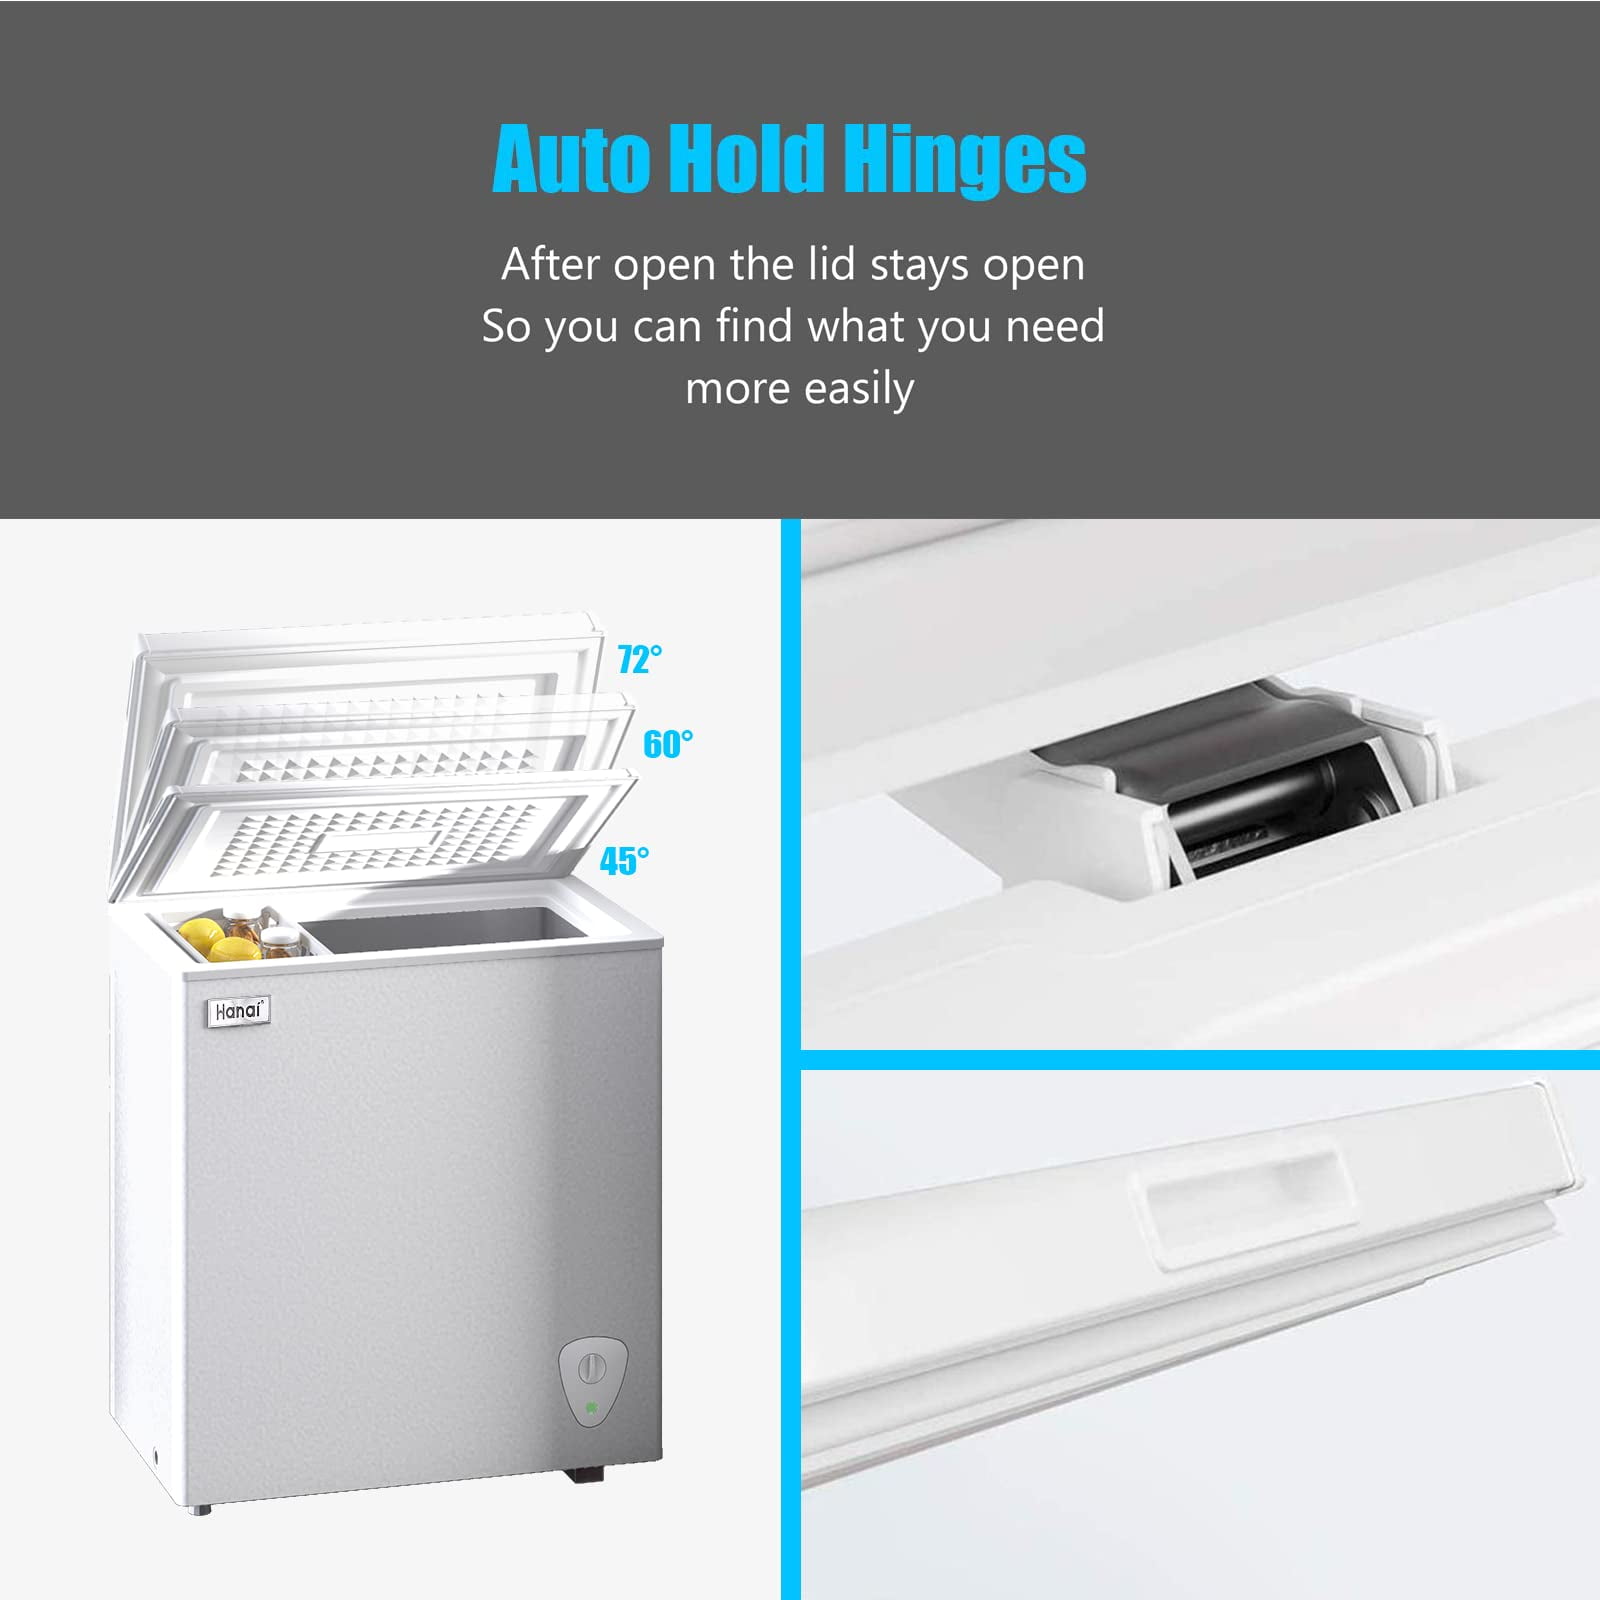 Chest Freezer 5 Cu.Ft Deep Freezer, Quiet Compact Freezer with Adjustable  Thermostat Control and Removable Wire Basket, For Apar - AliExpress